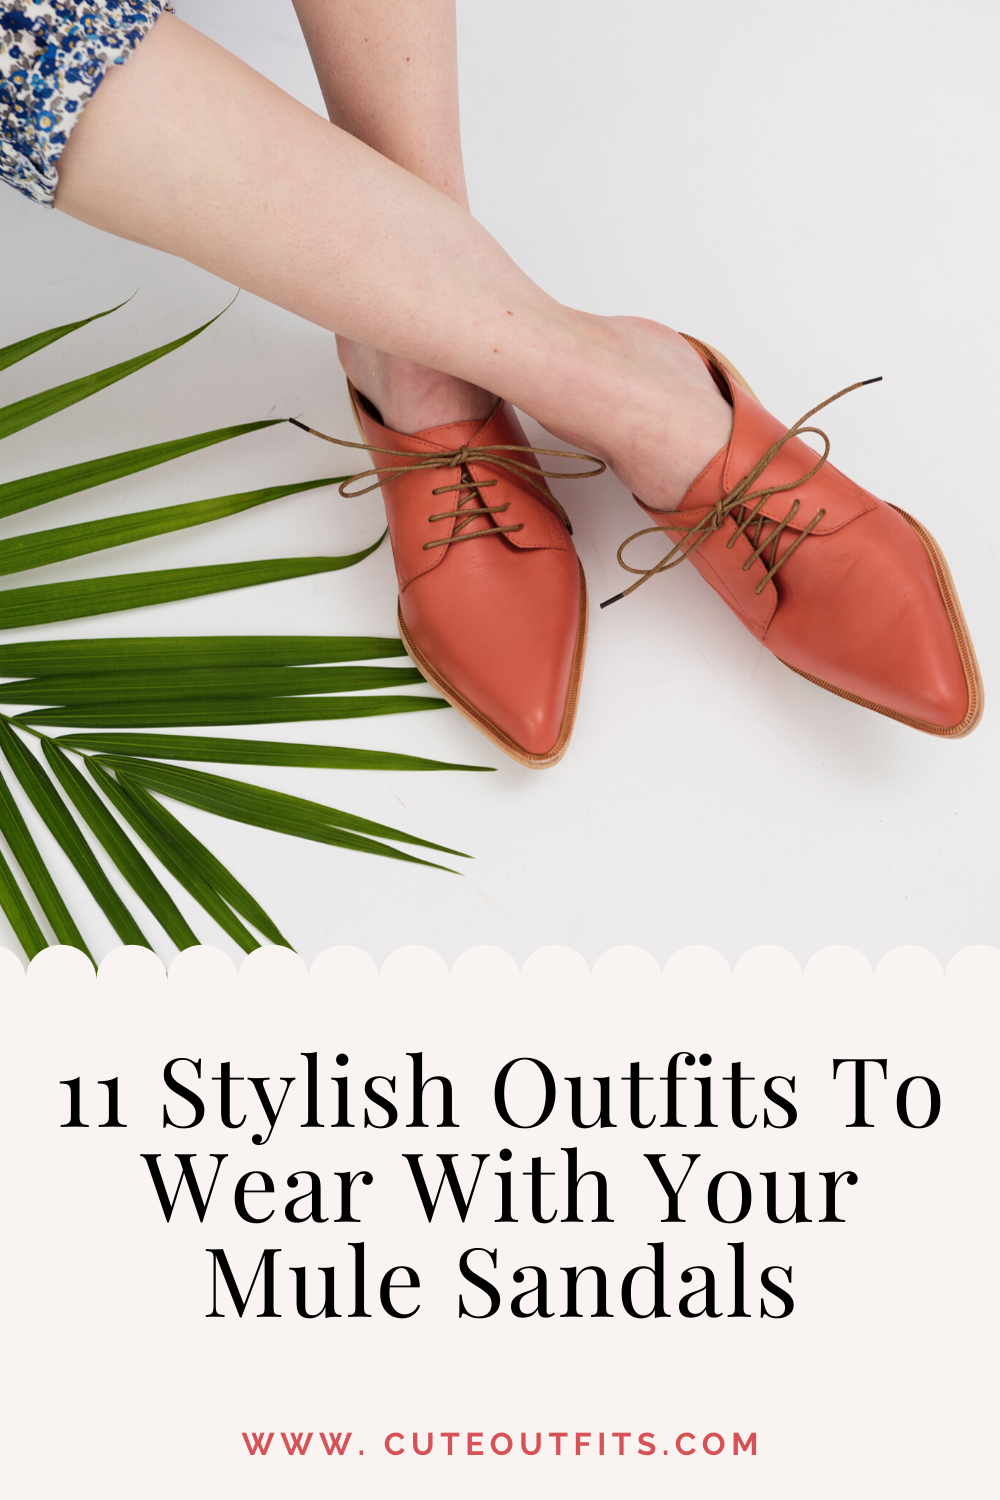 placard | 11 Stylish Outfits To Wear With Your Mule Sandals